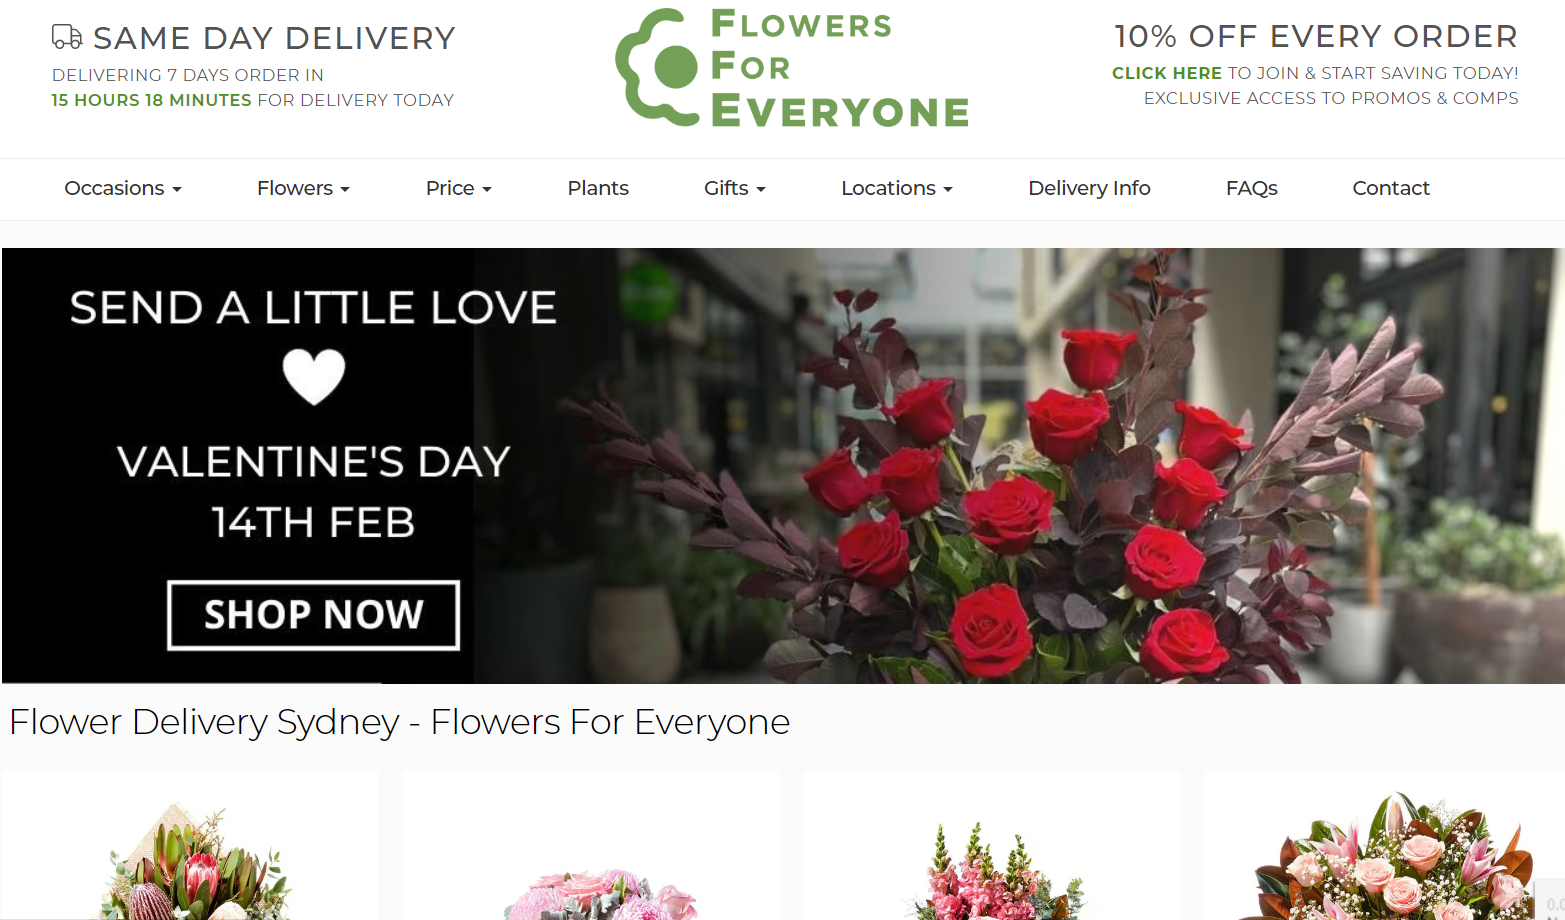 Best florist websites — design example from Flowers for Everyone.